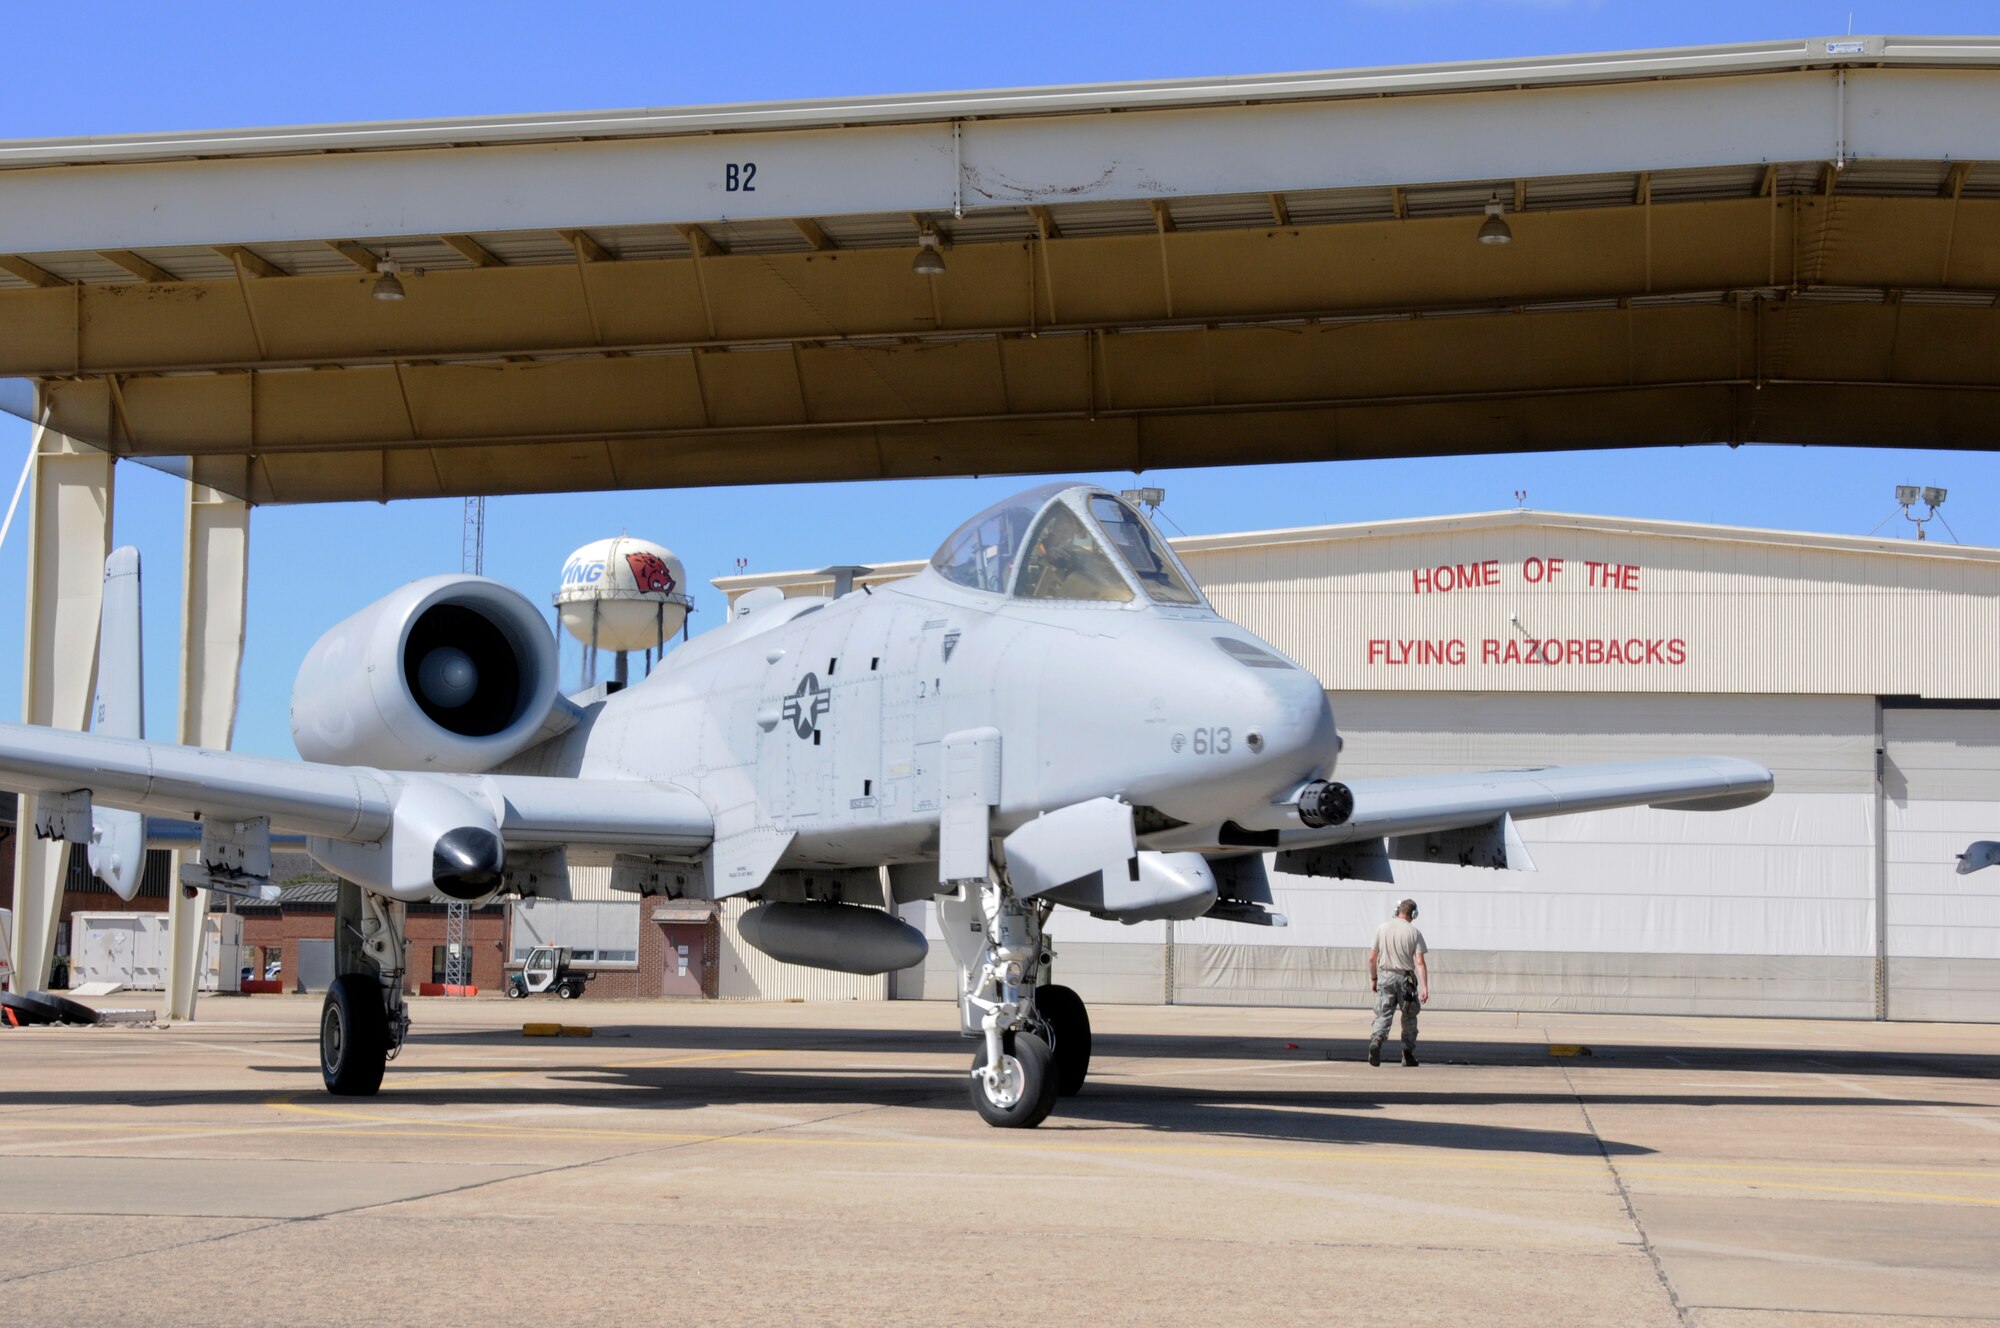 A pilot from the 23rd Wing in Moody Air Force Base, Ga., taxis on the ramp at Ebbing Air National Guard Base, Fort Smith, Ark. The pilot delivered the 188th A-10C Thunderbolt II "Warthog" (Tail No. 613) from Ebbing ANG Base to Moody AFB March 11, 2014, as part of the 188th's mission conversion from the A-10 to a remotely piloted aircraft, intelligence and targeting mission. The 188th has five remaining A-10s on station. The next A-10 is slated to depart in April. The final two aircraft are scheduled to leave the 188th June 7, 2014. (U.S. Air National Guard photo by Tech Sgt. Josh Lewis/Released)